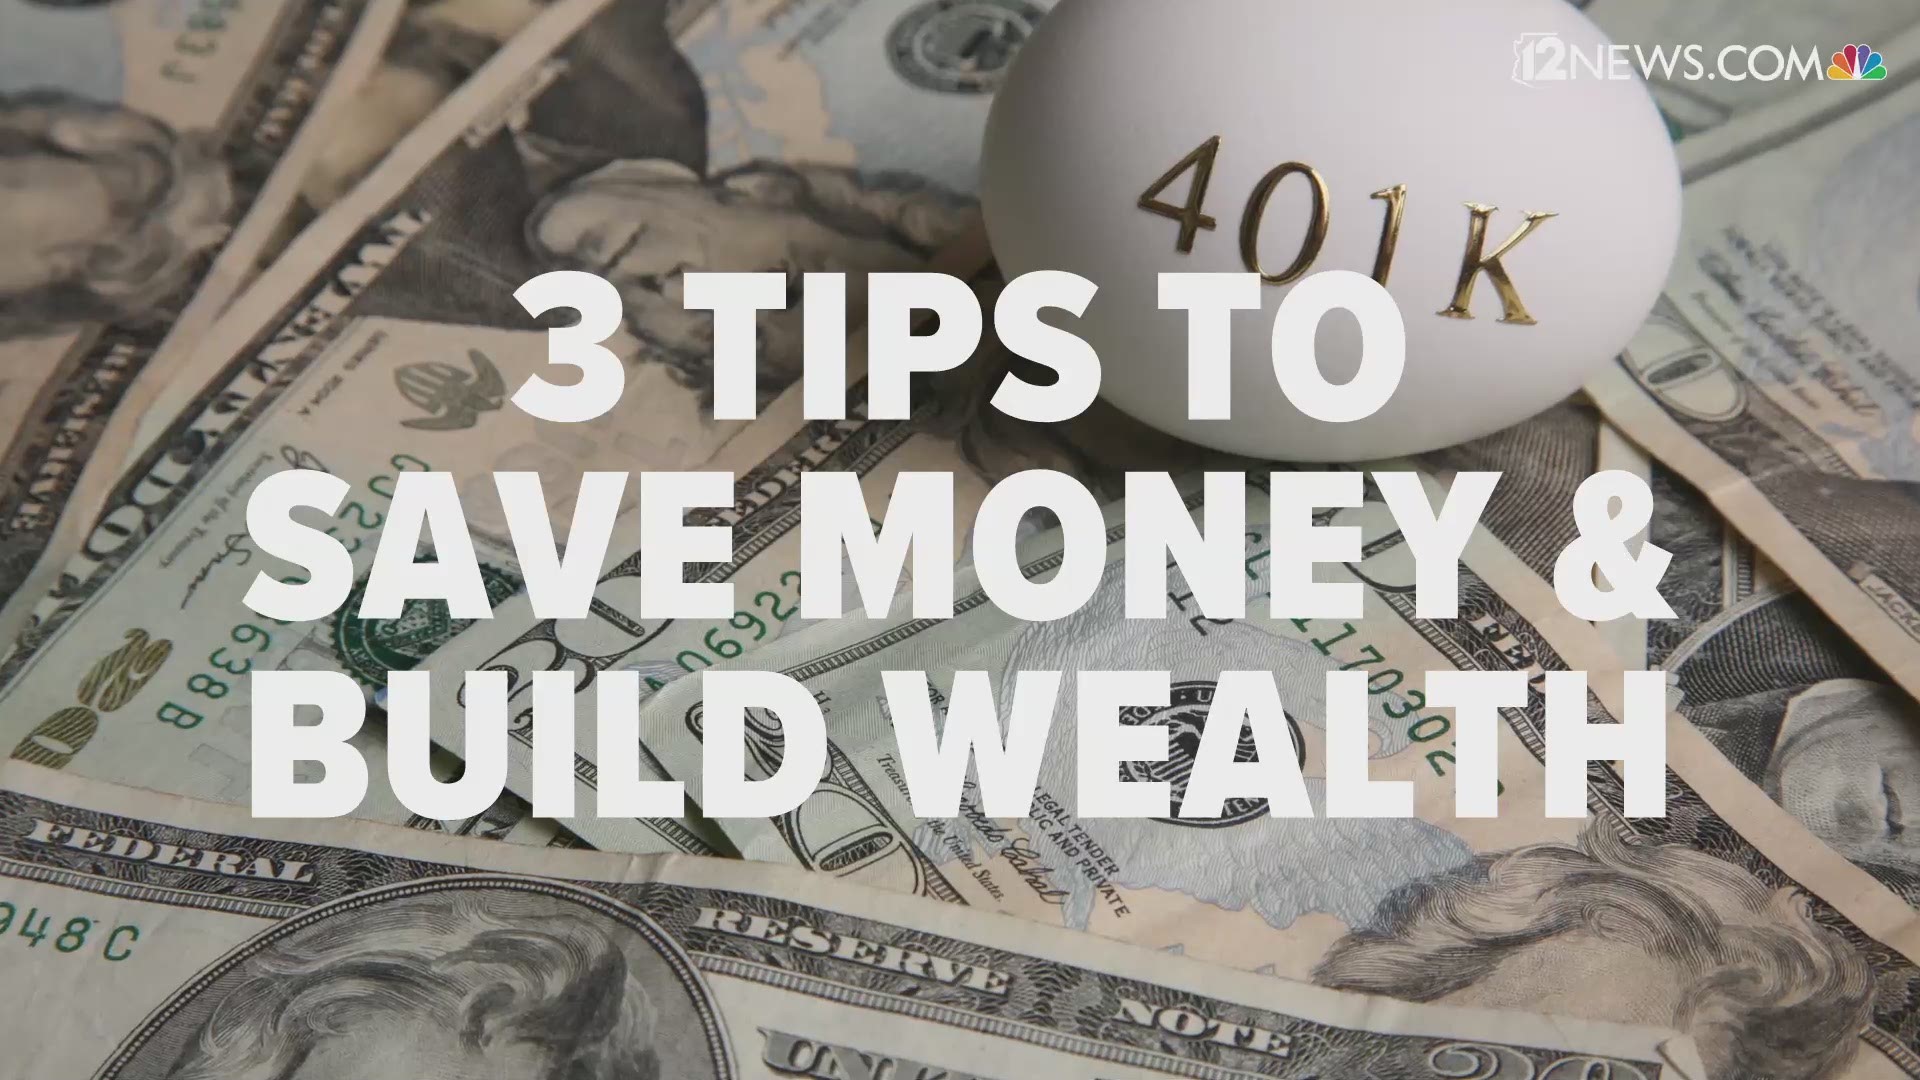 Looking to increase your savings and build your wealth this year? A Wealth Management Advisor offers some tips to get started.